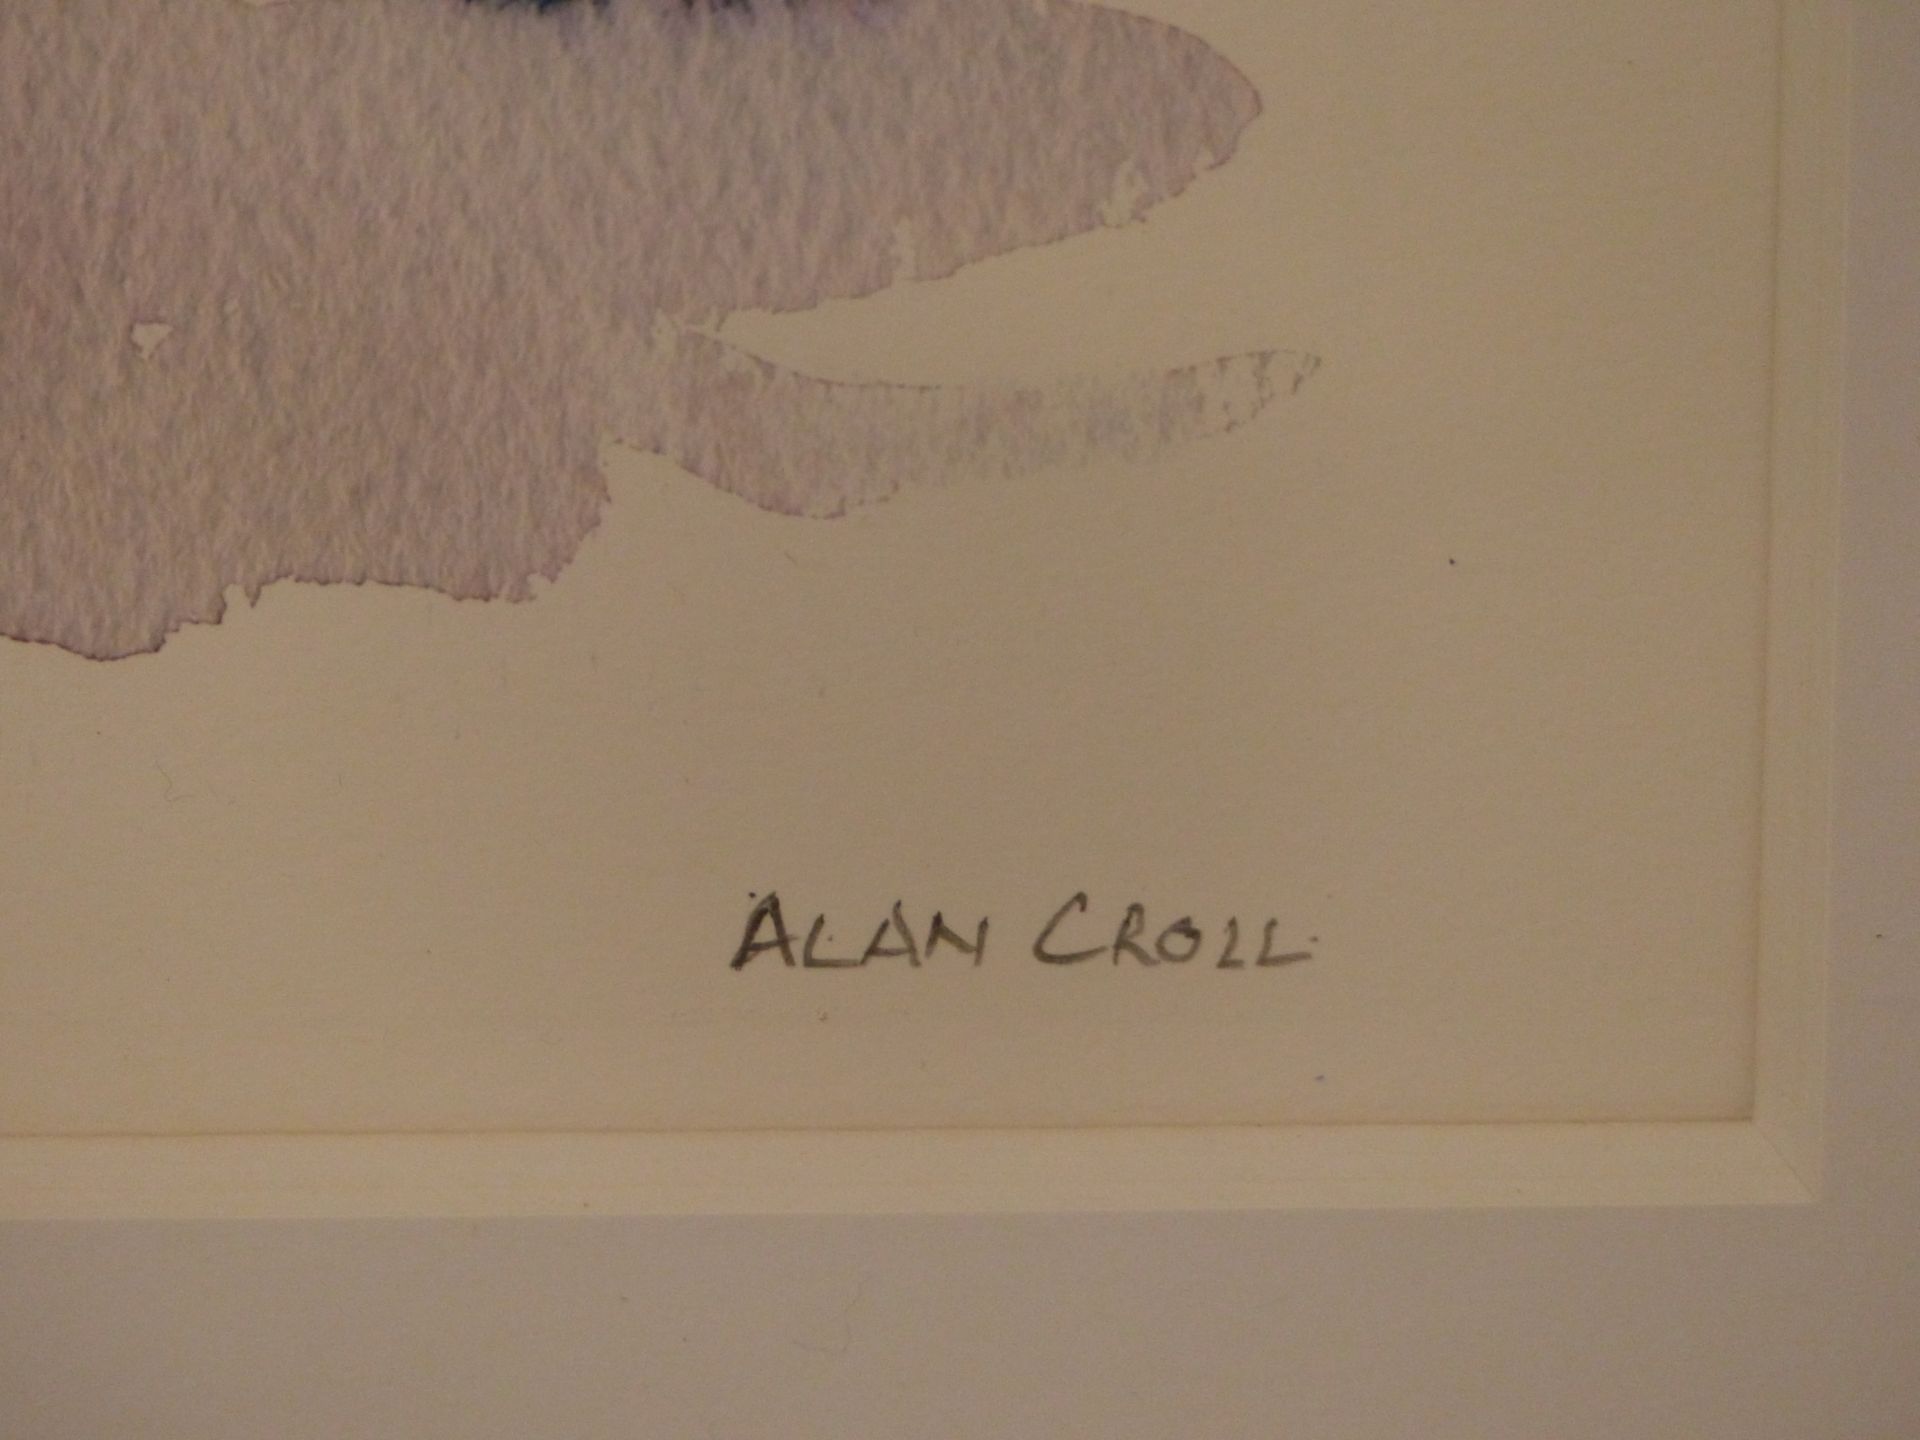 ALAN CROLL (20TH/21ST CENTURY), SEAGULLS, SIGNED AND NUMBERED 3/50 IN PENCIL, COLOUR PRINT, 38 X - Image 3 of 5